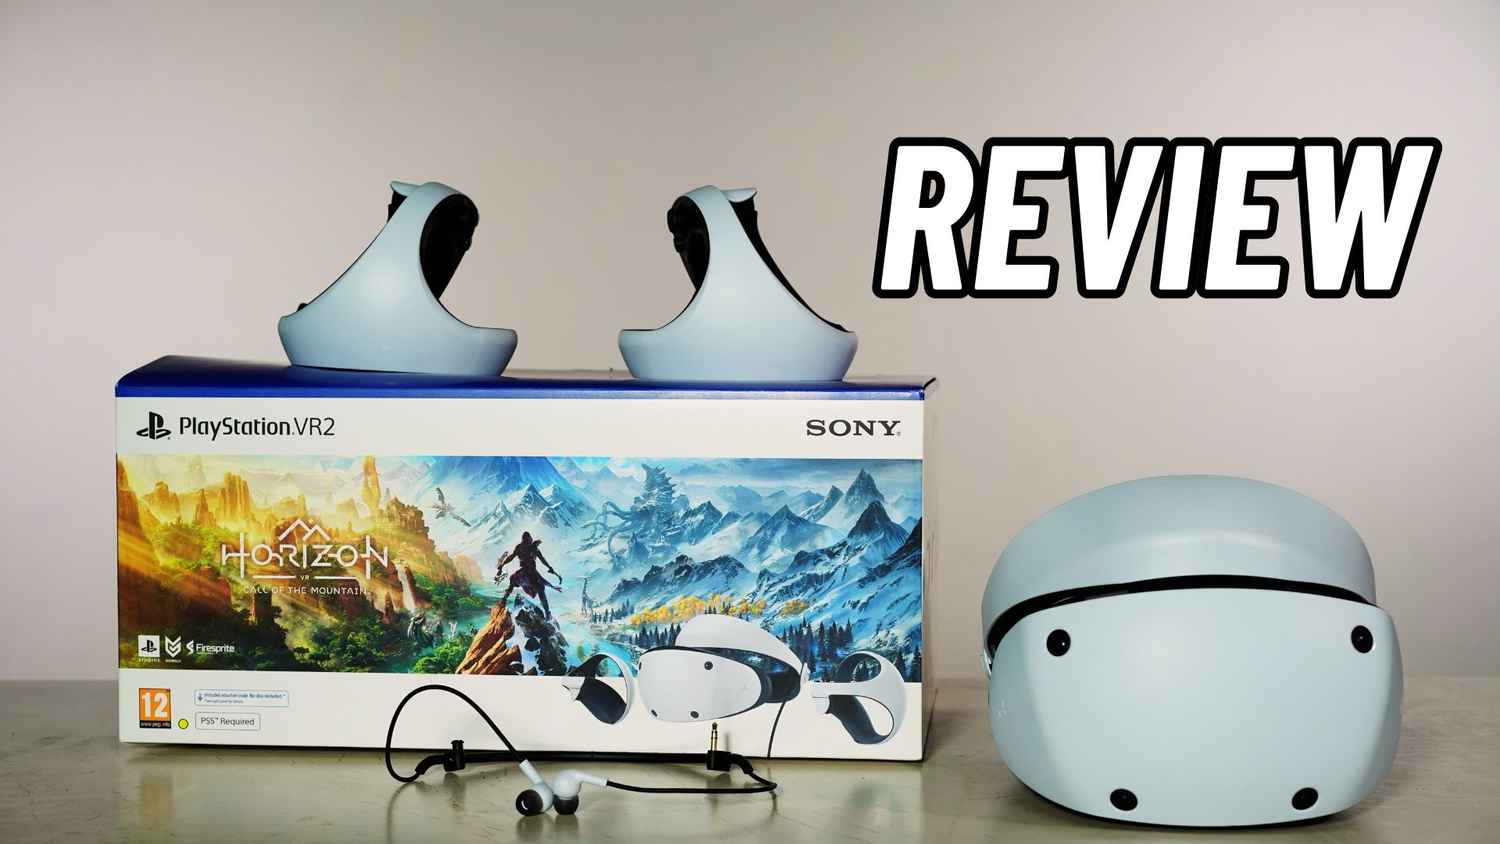 Sony Ps Vr2 Playstation Vr2 3d Vr Glasses Virtual Reality Headset  Communicate With Ps5 Playstation 5 Sony Ps5 Ps Vr Console - Video Game  Consoles - AliExpress